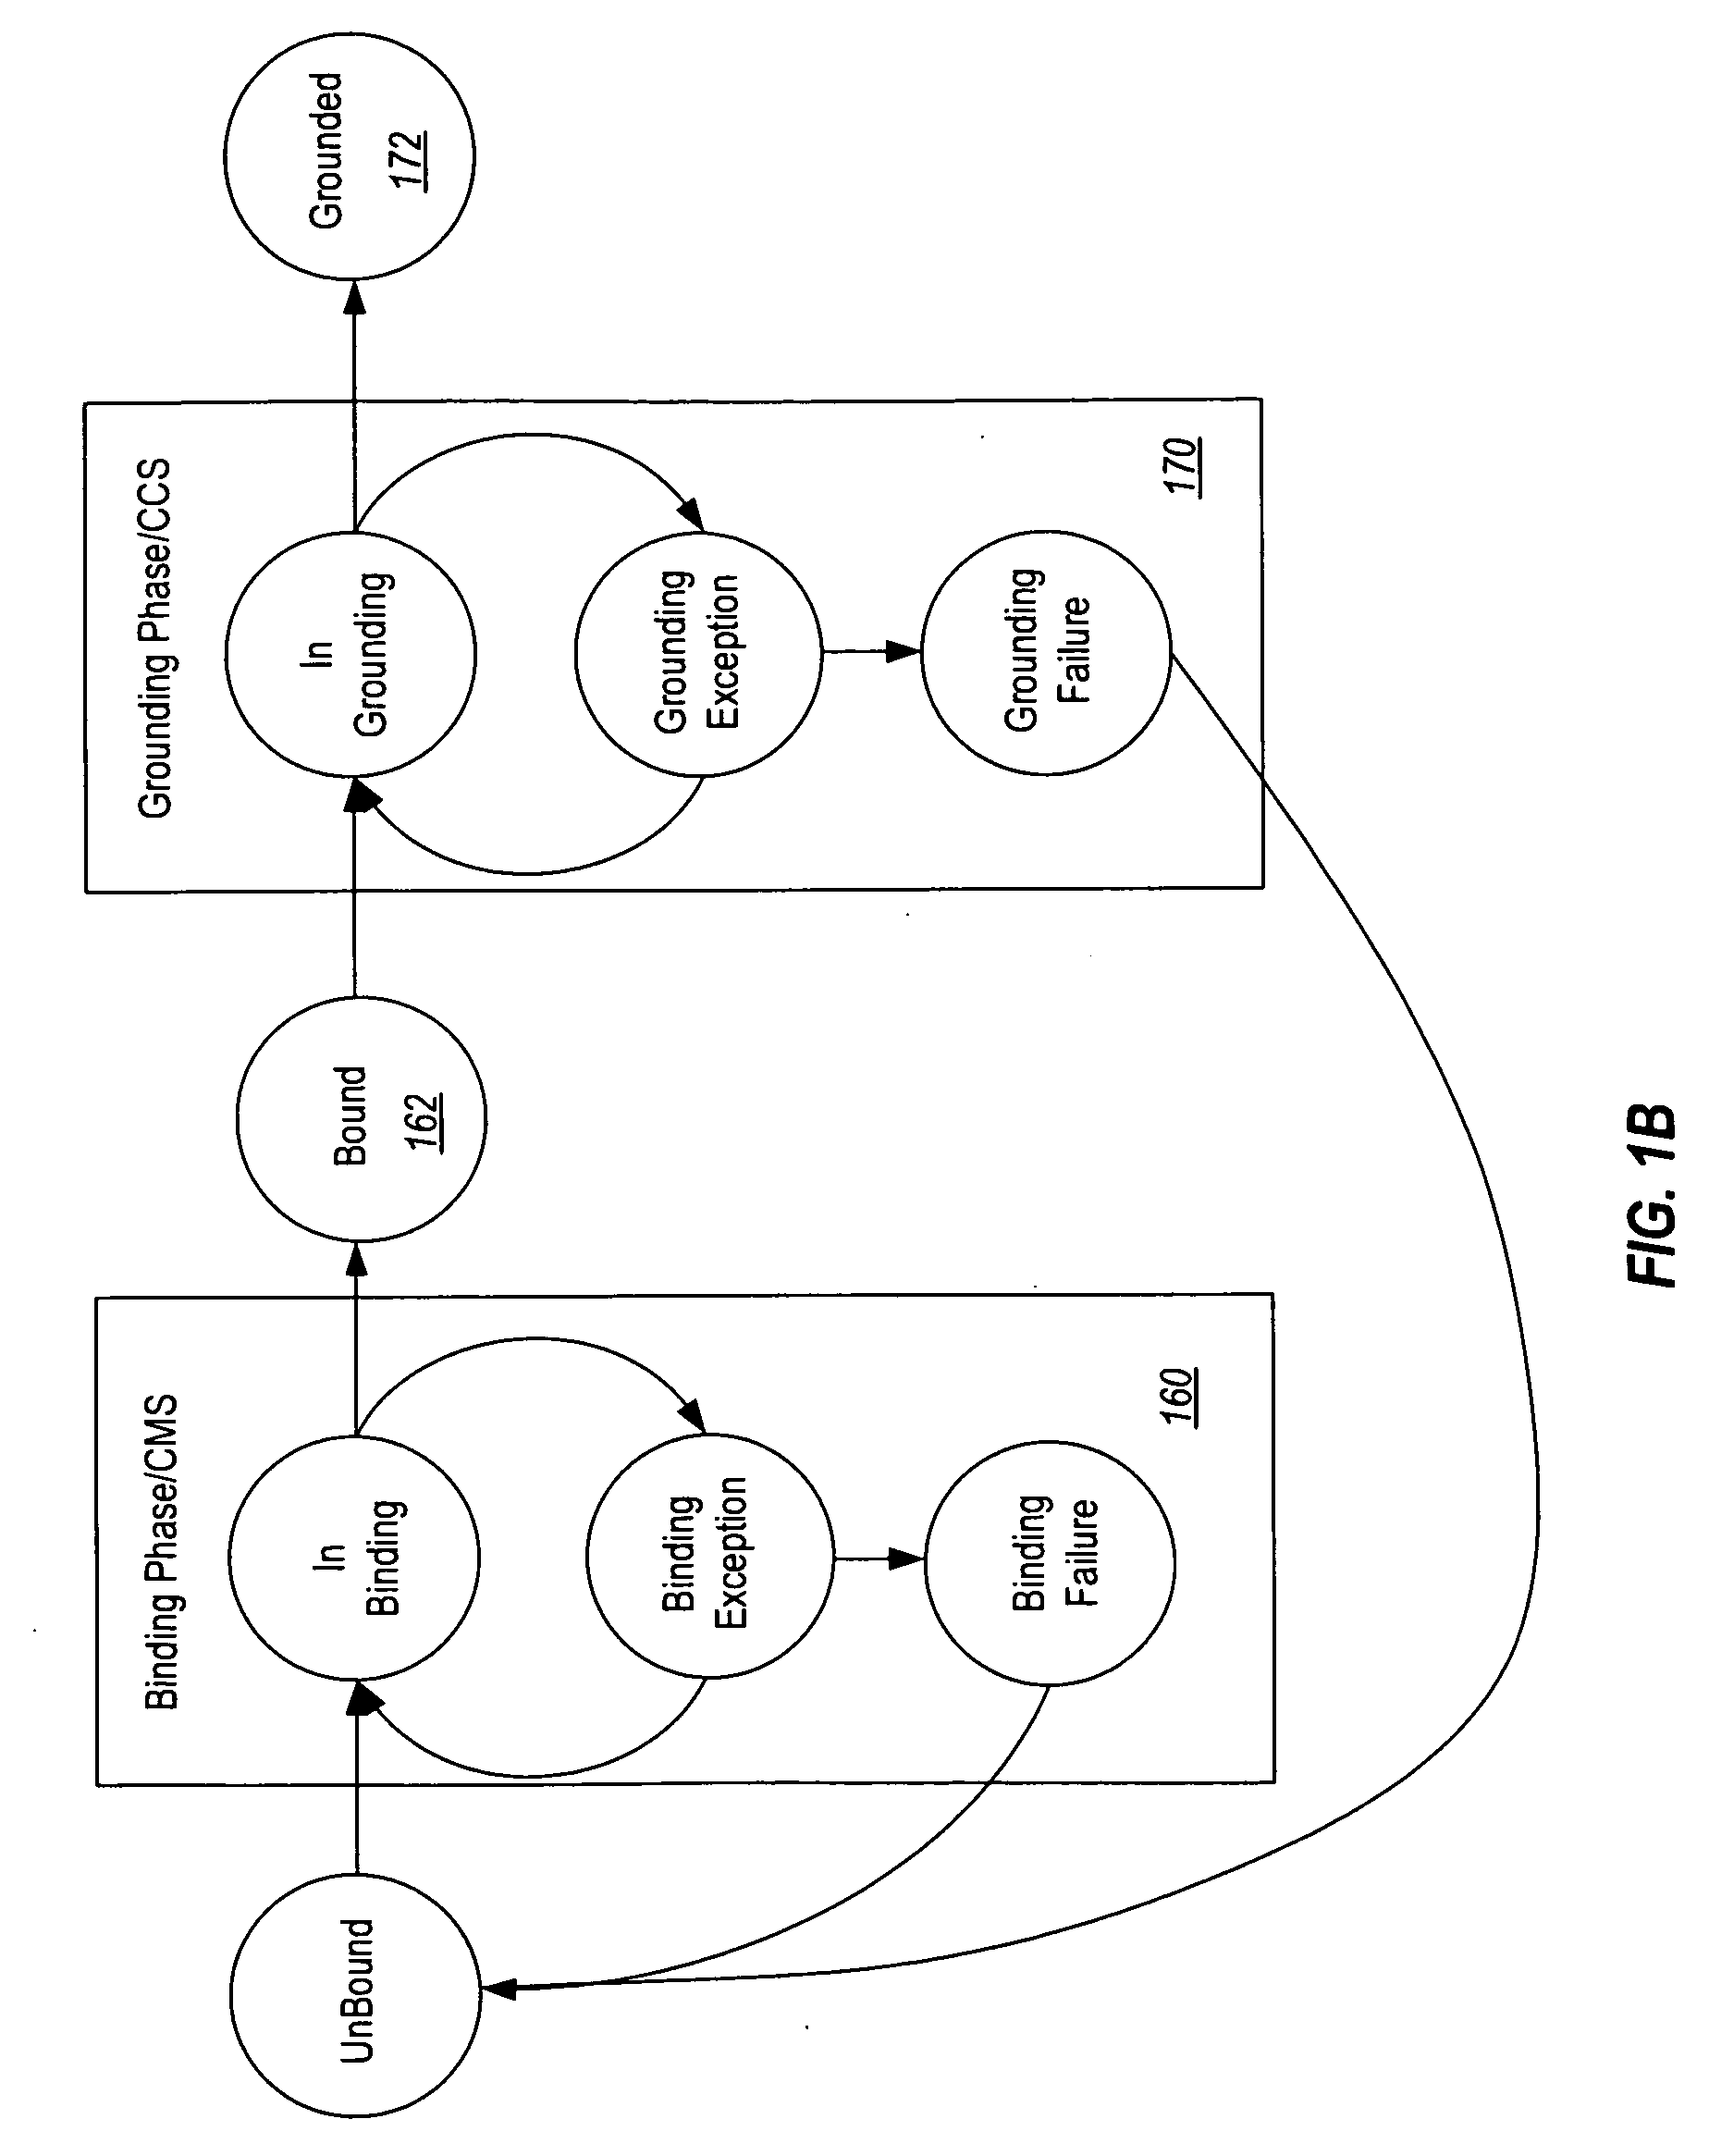 Architecture For Instantiating Information Technology Services